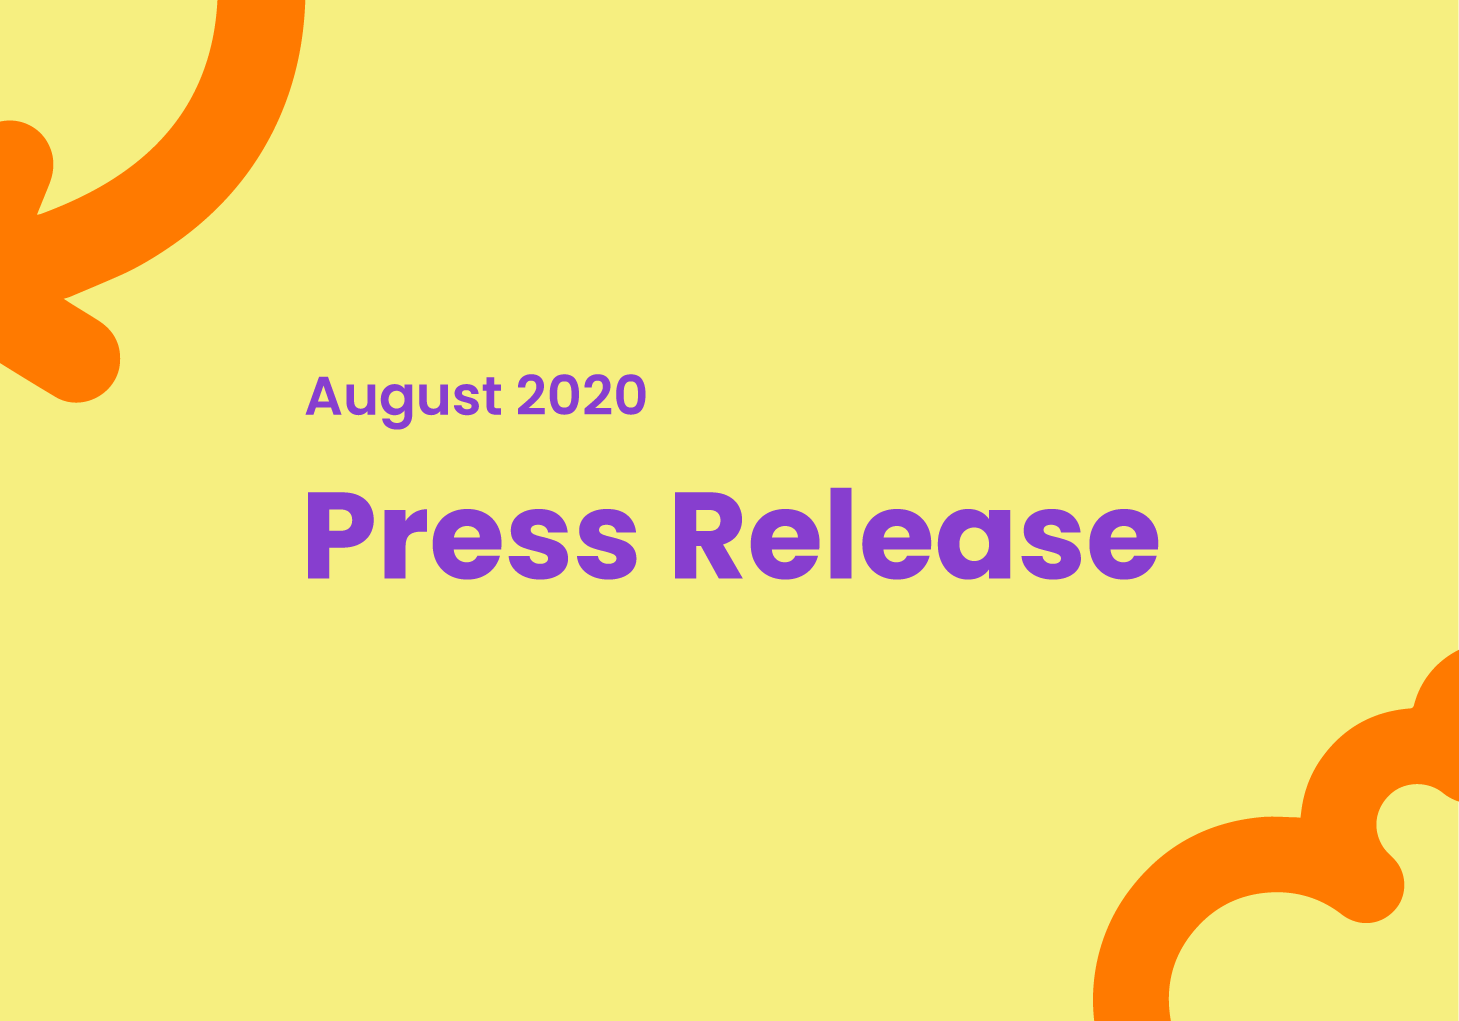 August 2020: Press Release